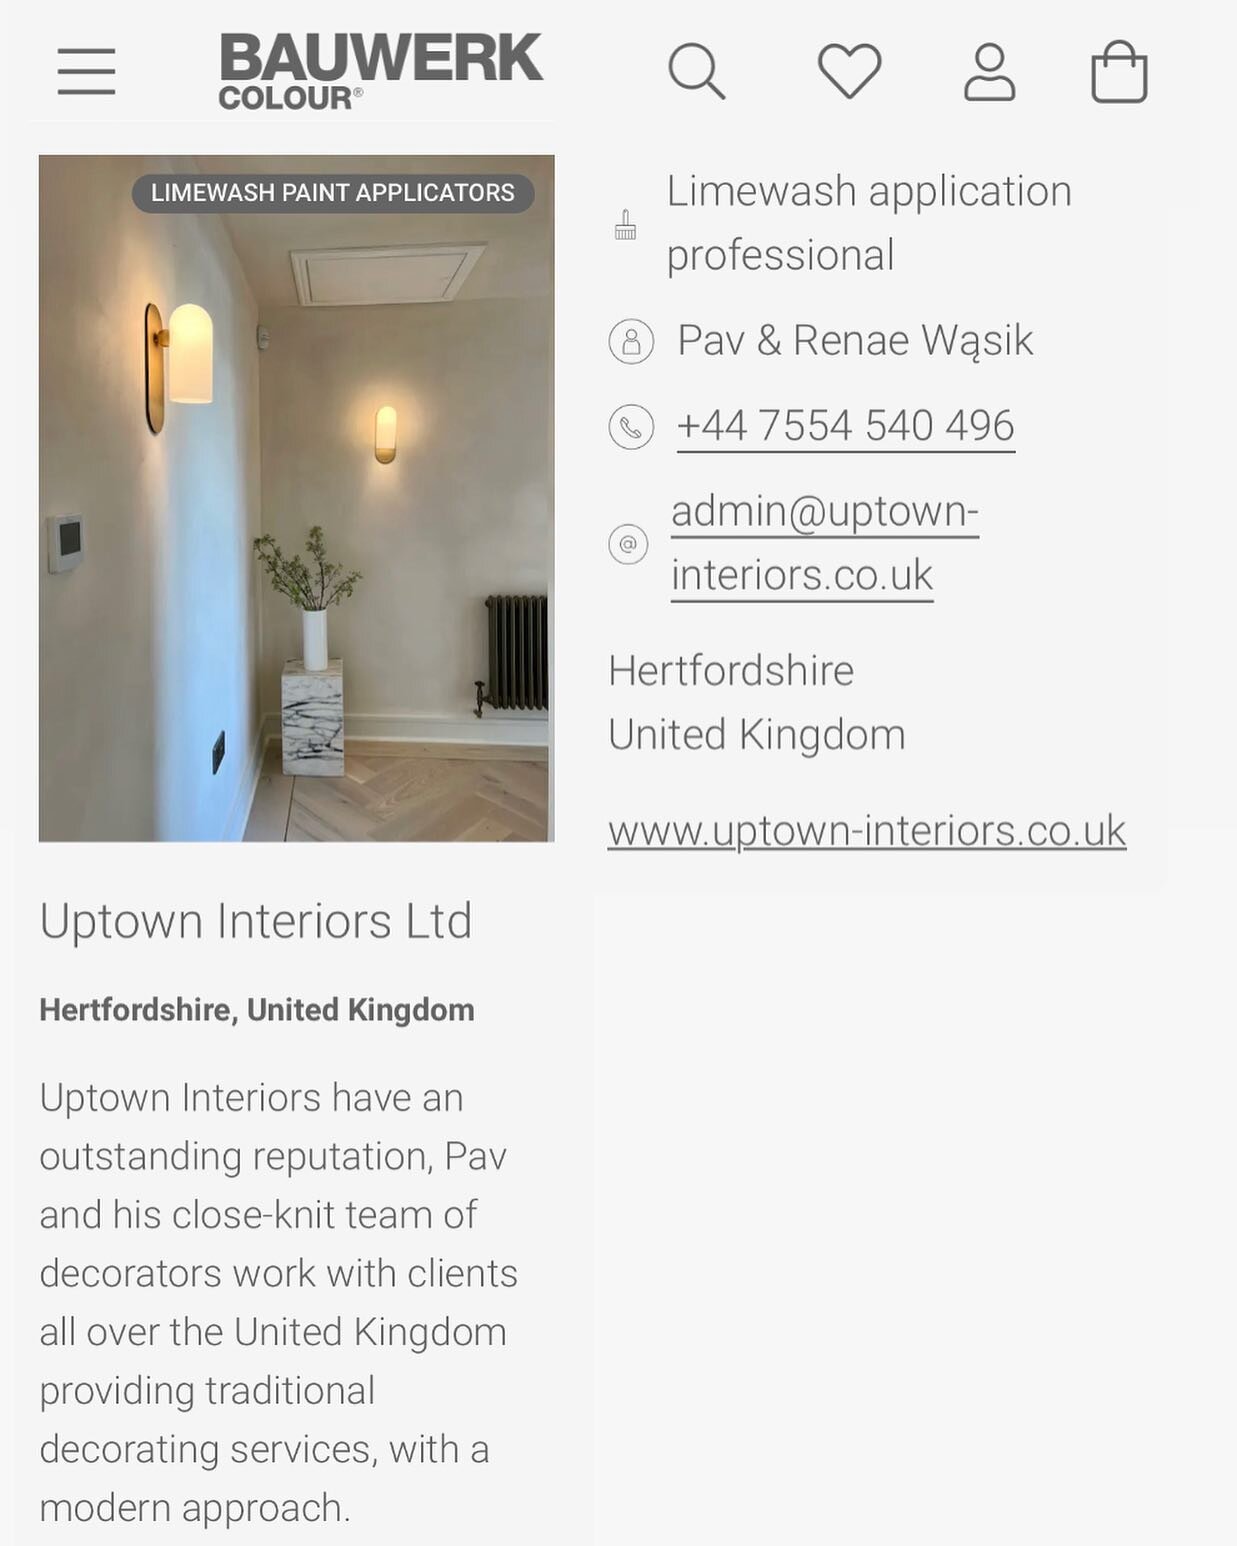 We are honoured to be listed as one of @bauwerkcolour&rsquo;s recommended expert applicators in the U.K. - We pride ourselves on mastering skills like Limewash application, and these recognitions make all the hard work worth it. #limewash #bauwek #de